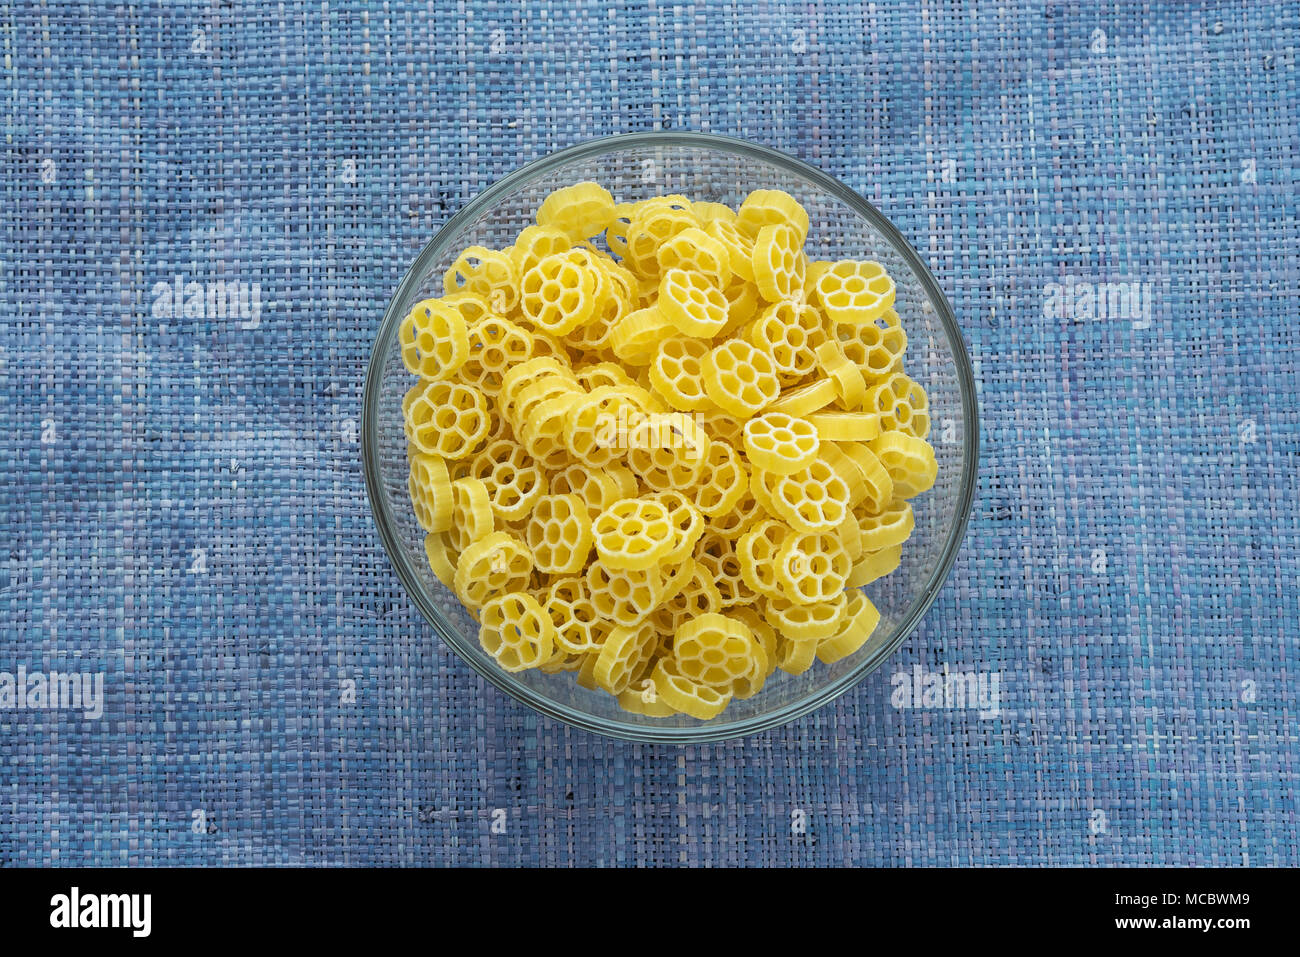 Macaroni ruote Pasta in a glass bowl on a blue knitted background in the center. Close-up with the top. Stock Photo